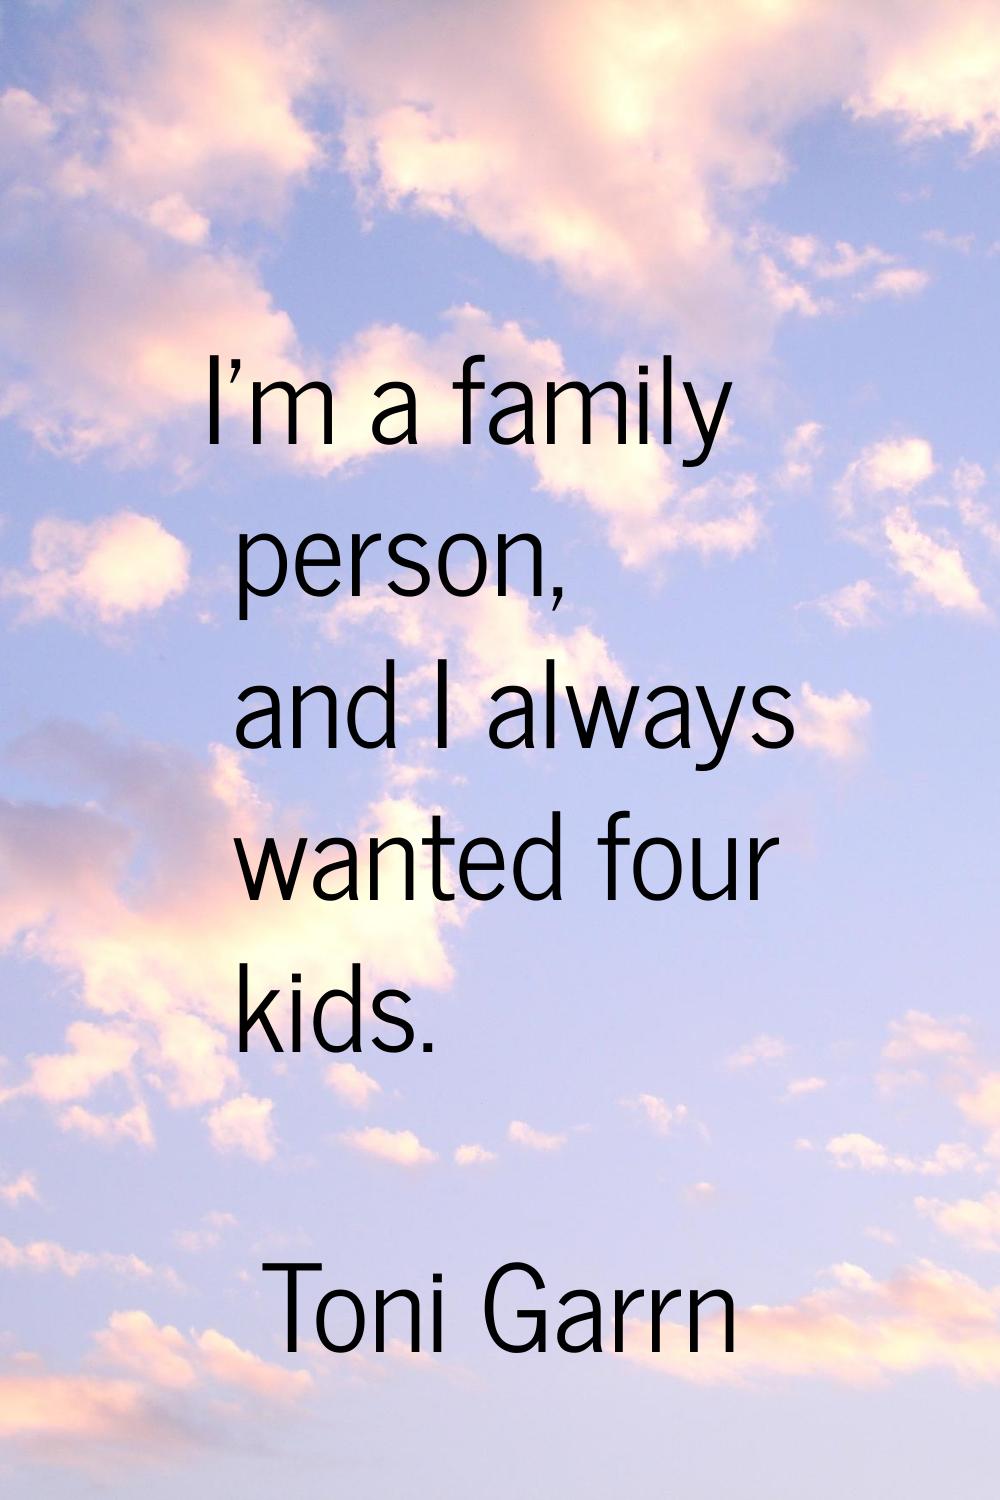 I'm a family person, and I always wanted four kids.